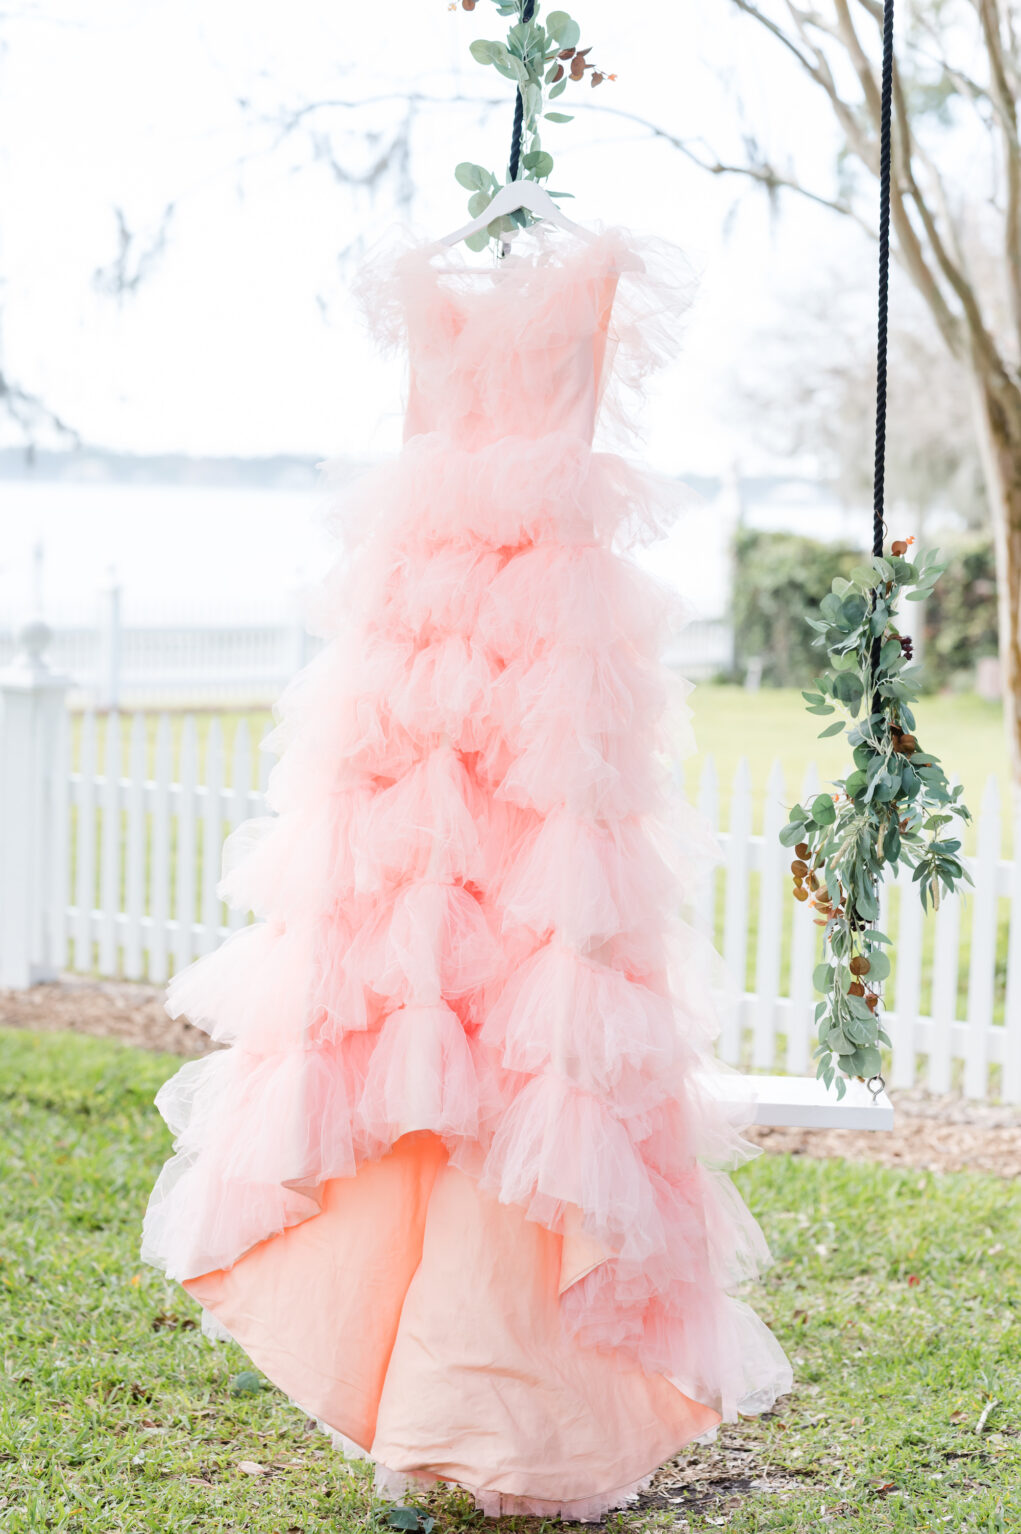 Unique Whimsical Fun Pink Layered Tulle Wedding Dress Ideas